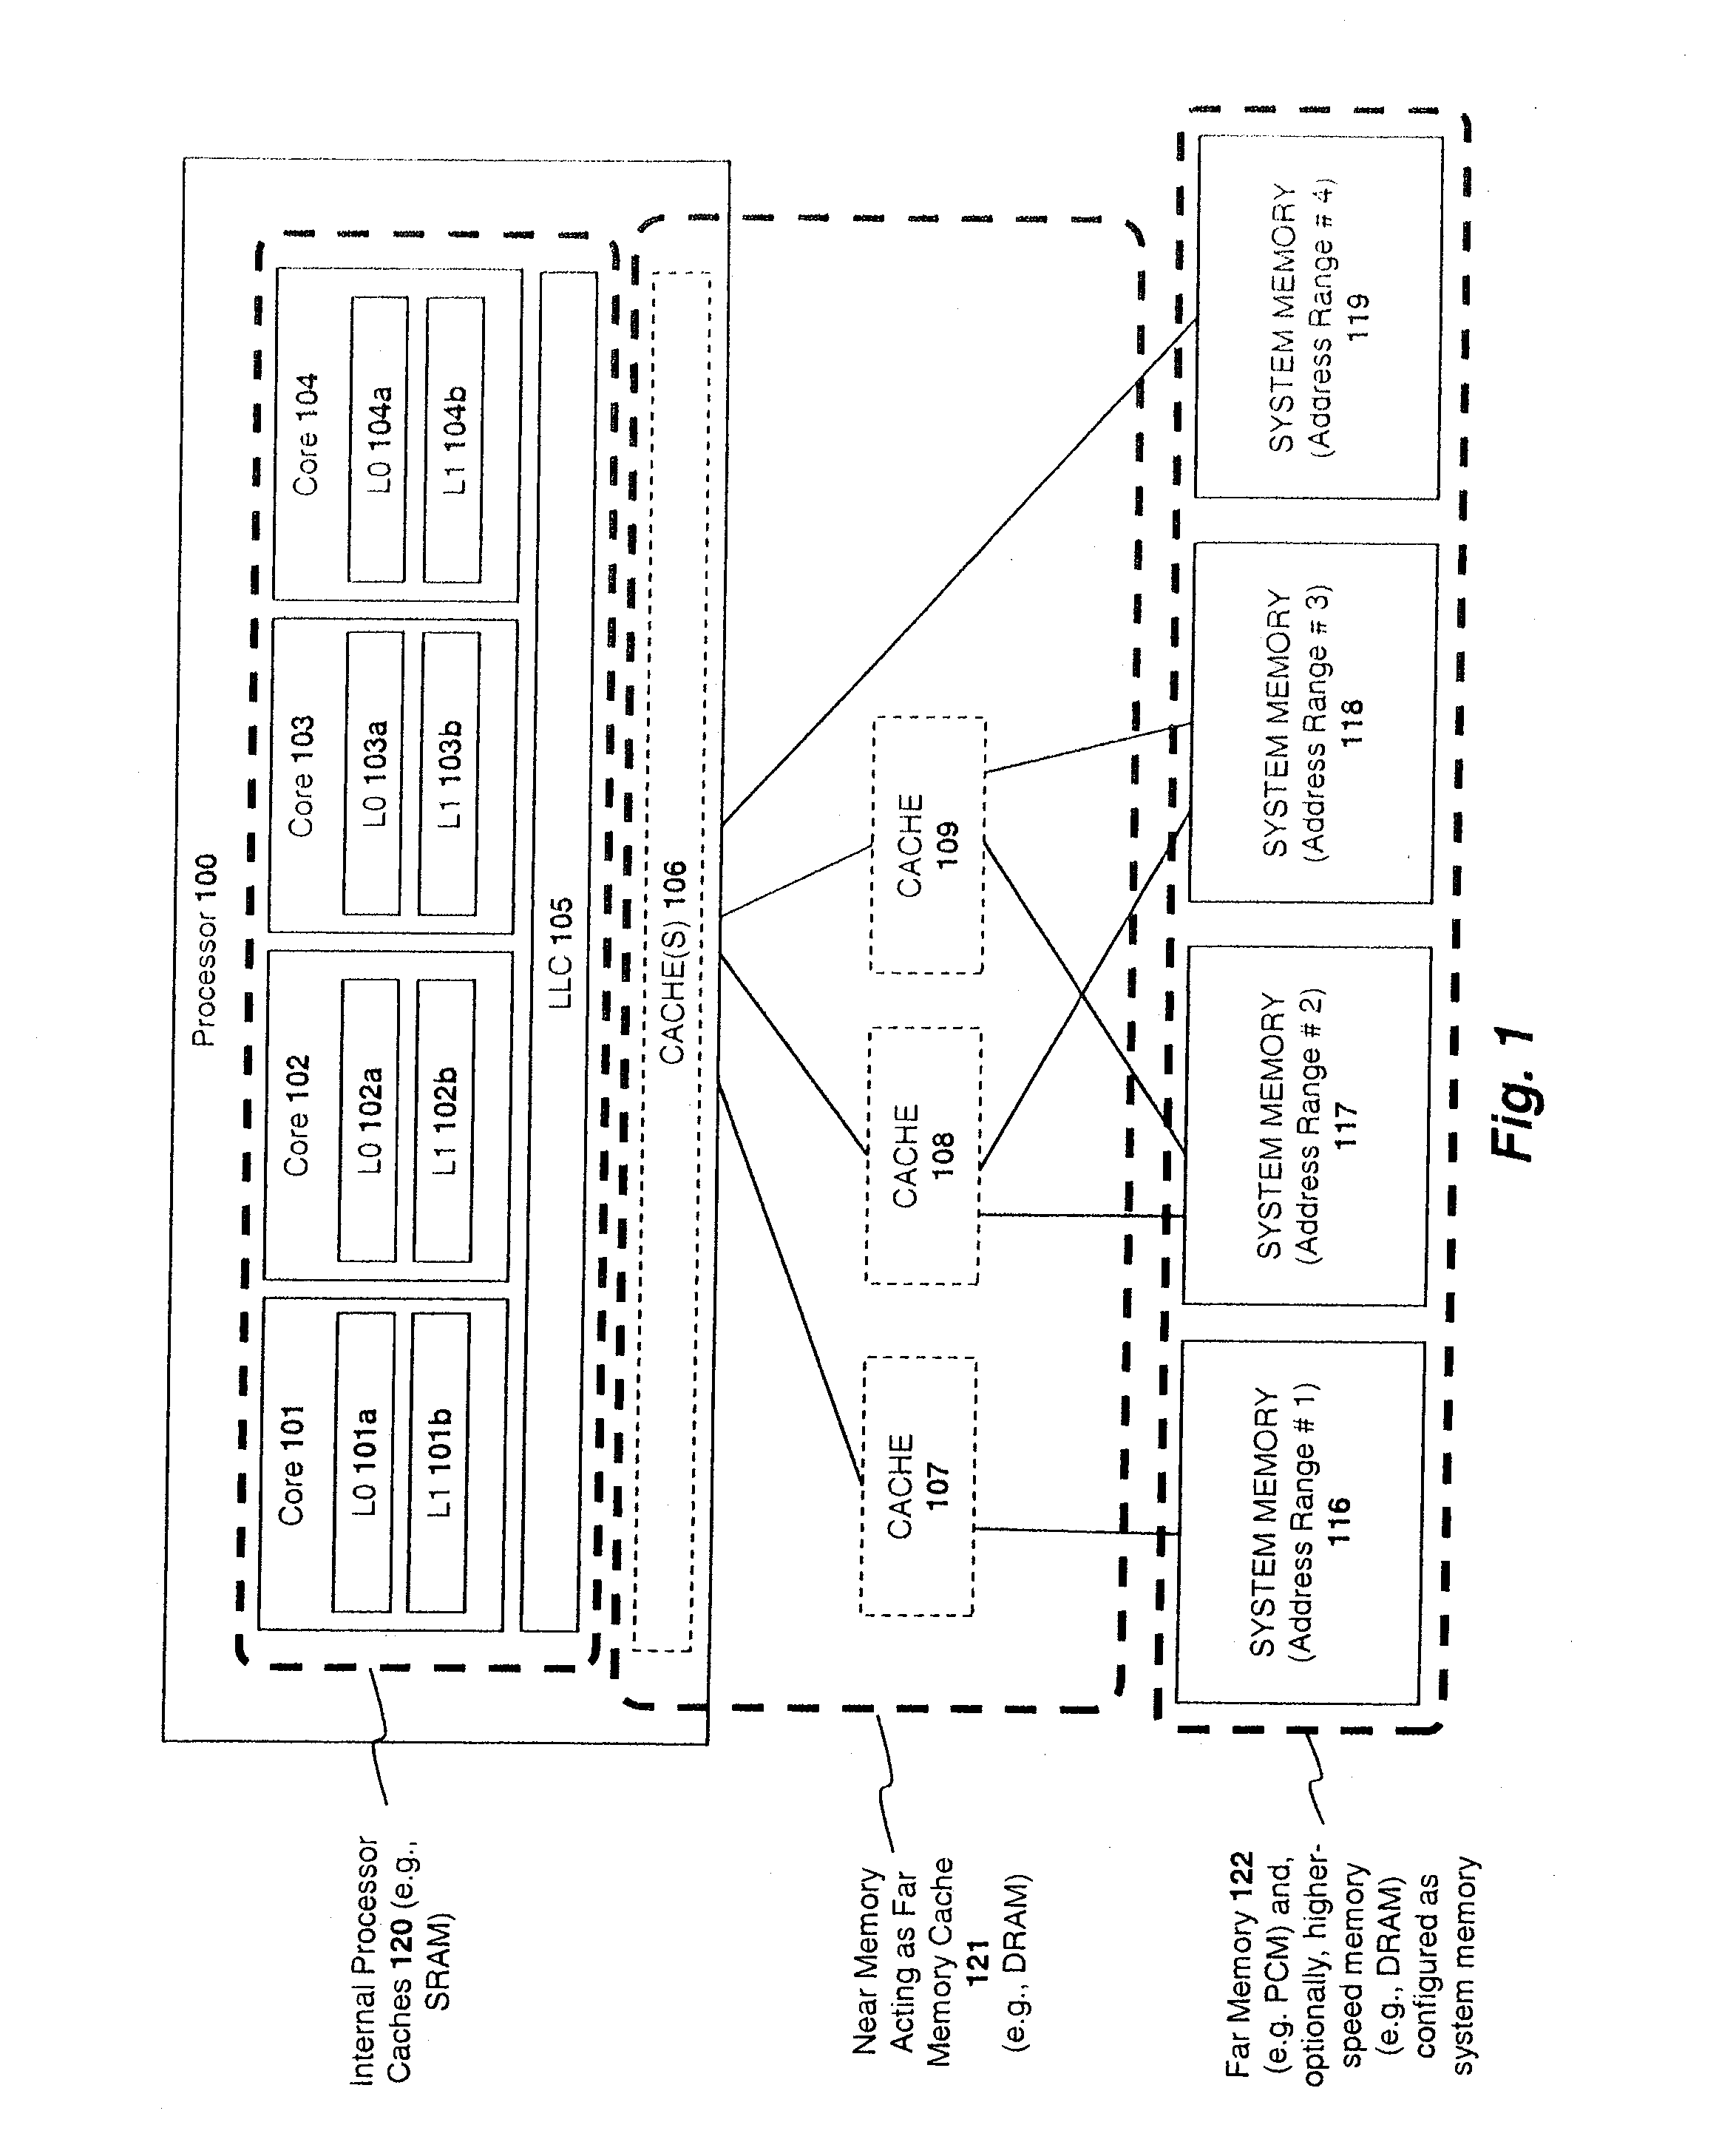 Memory channel that supports near memory and far memory access